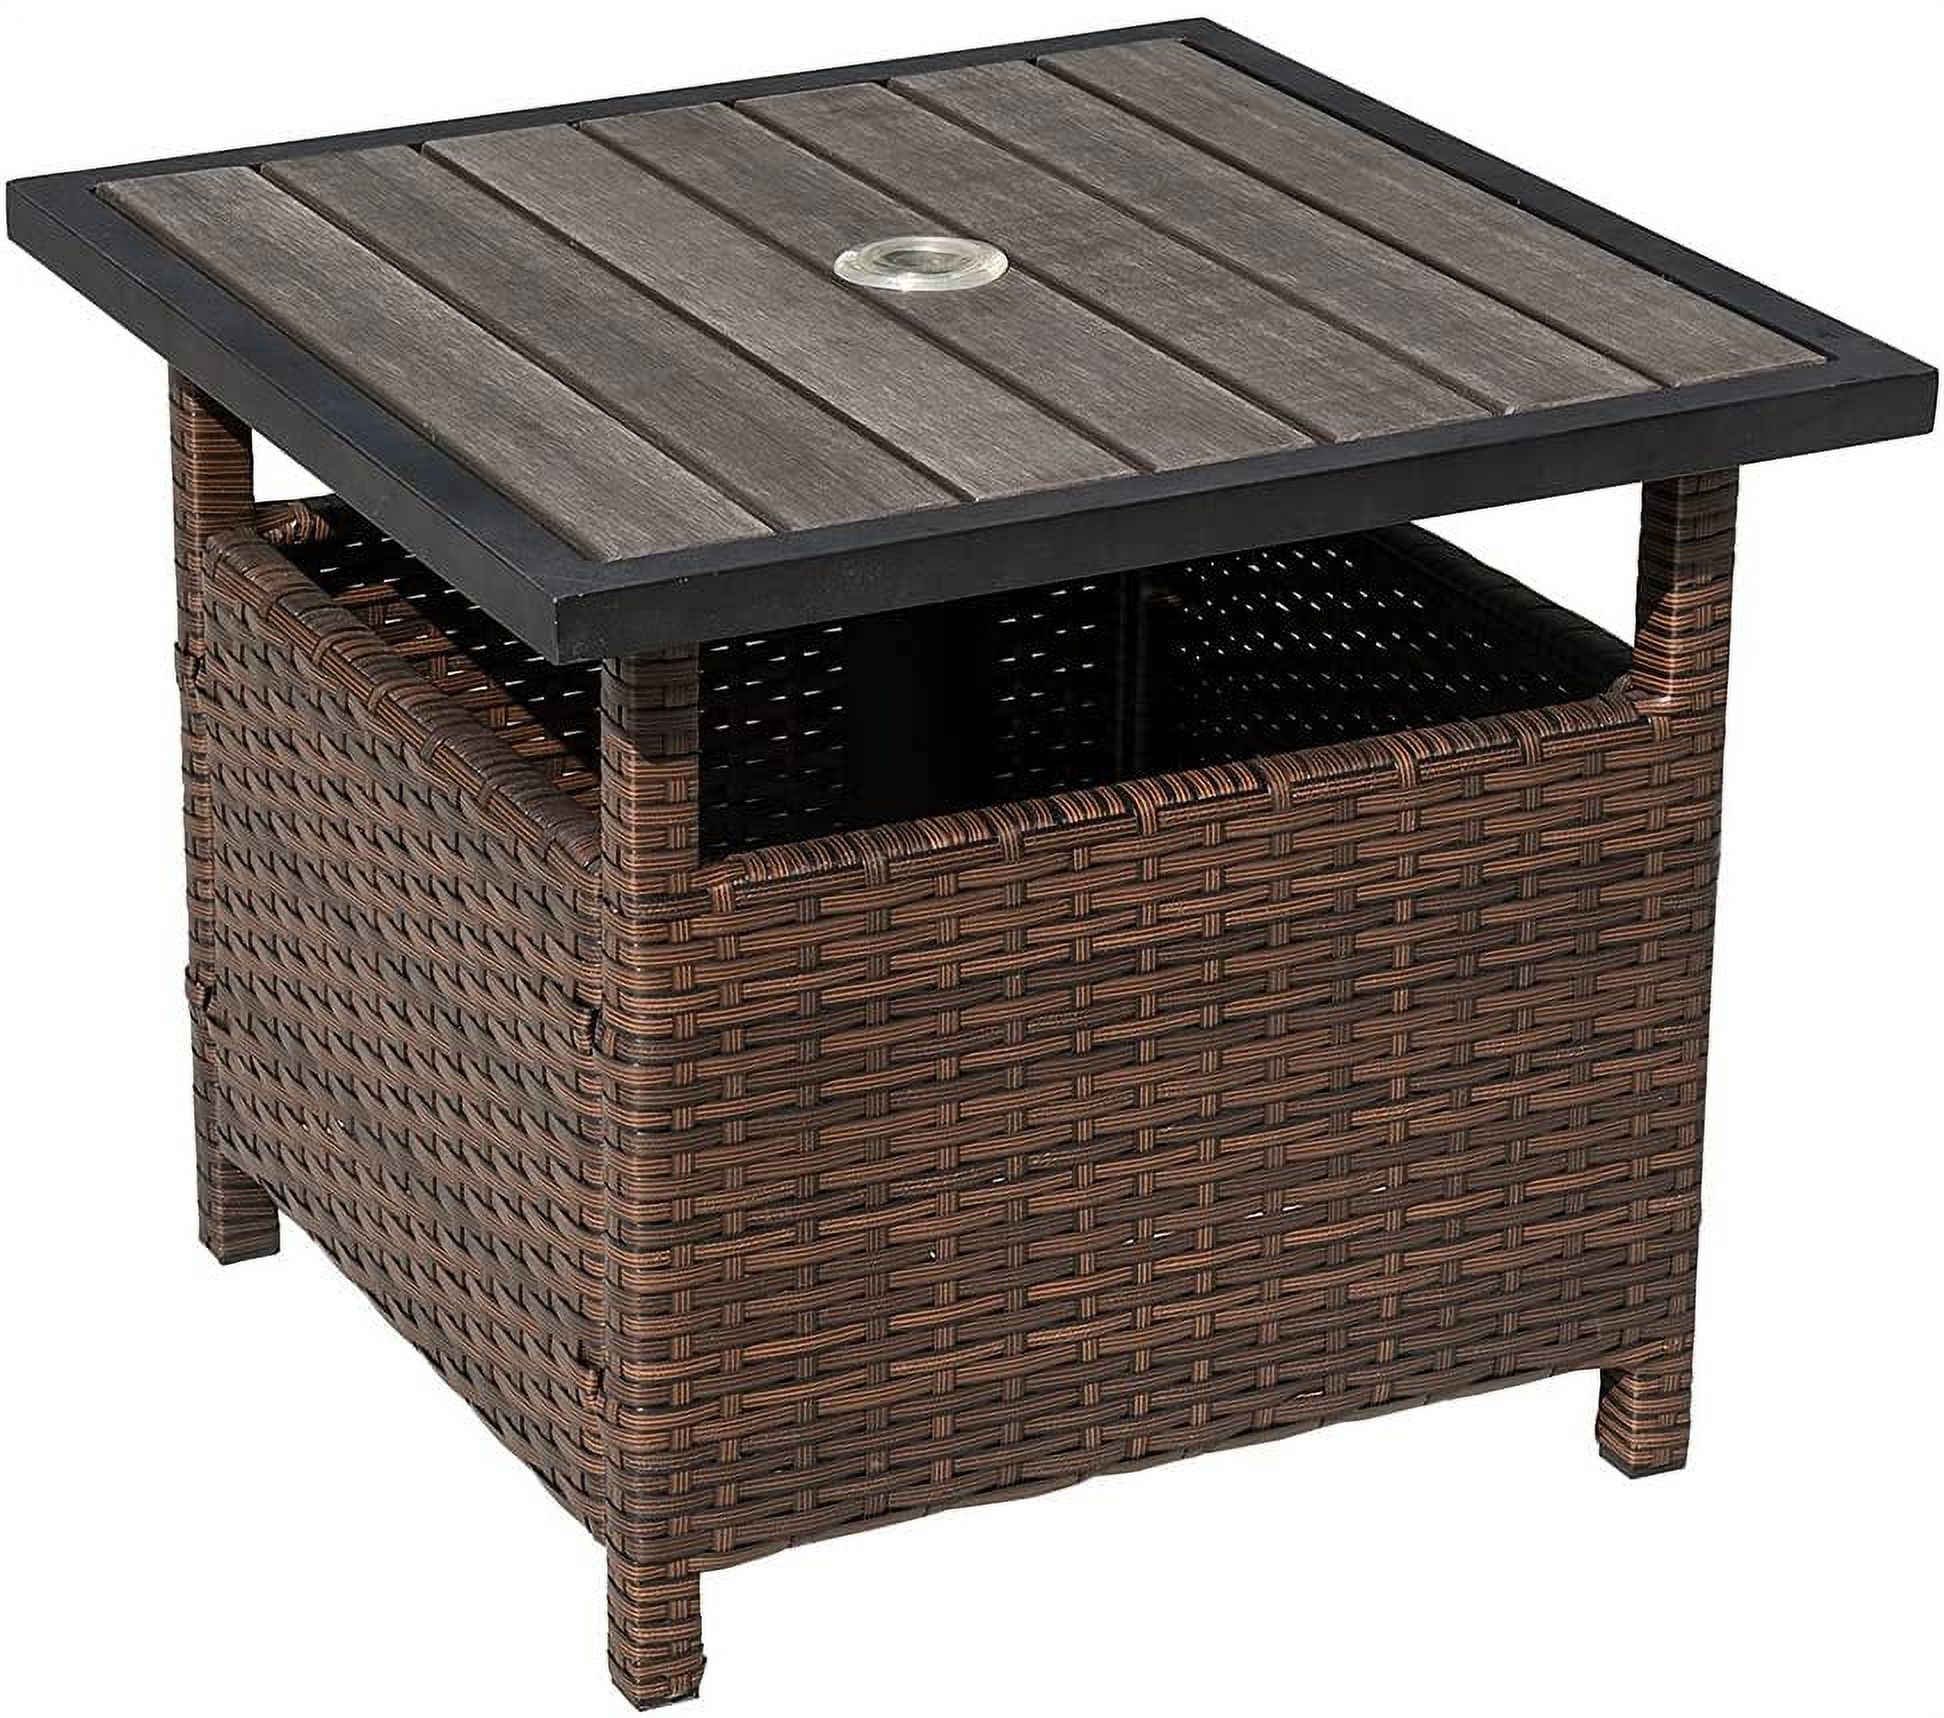 Patio Table with Umbrella Hole Small Outdoor Side Table All-Wather Faux Wicker Rettan Umbrella Stand, Brown - image 1 of 7